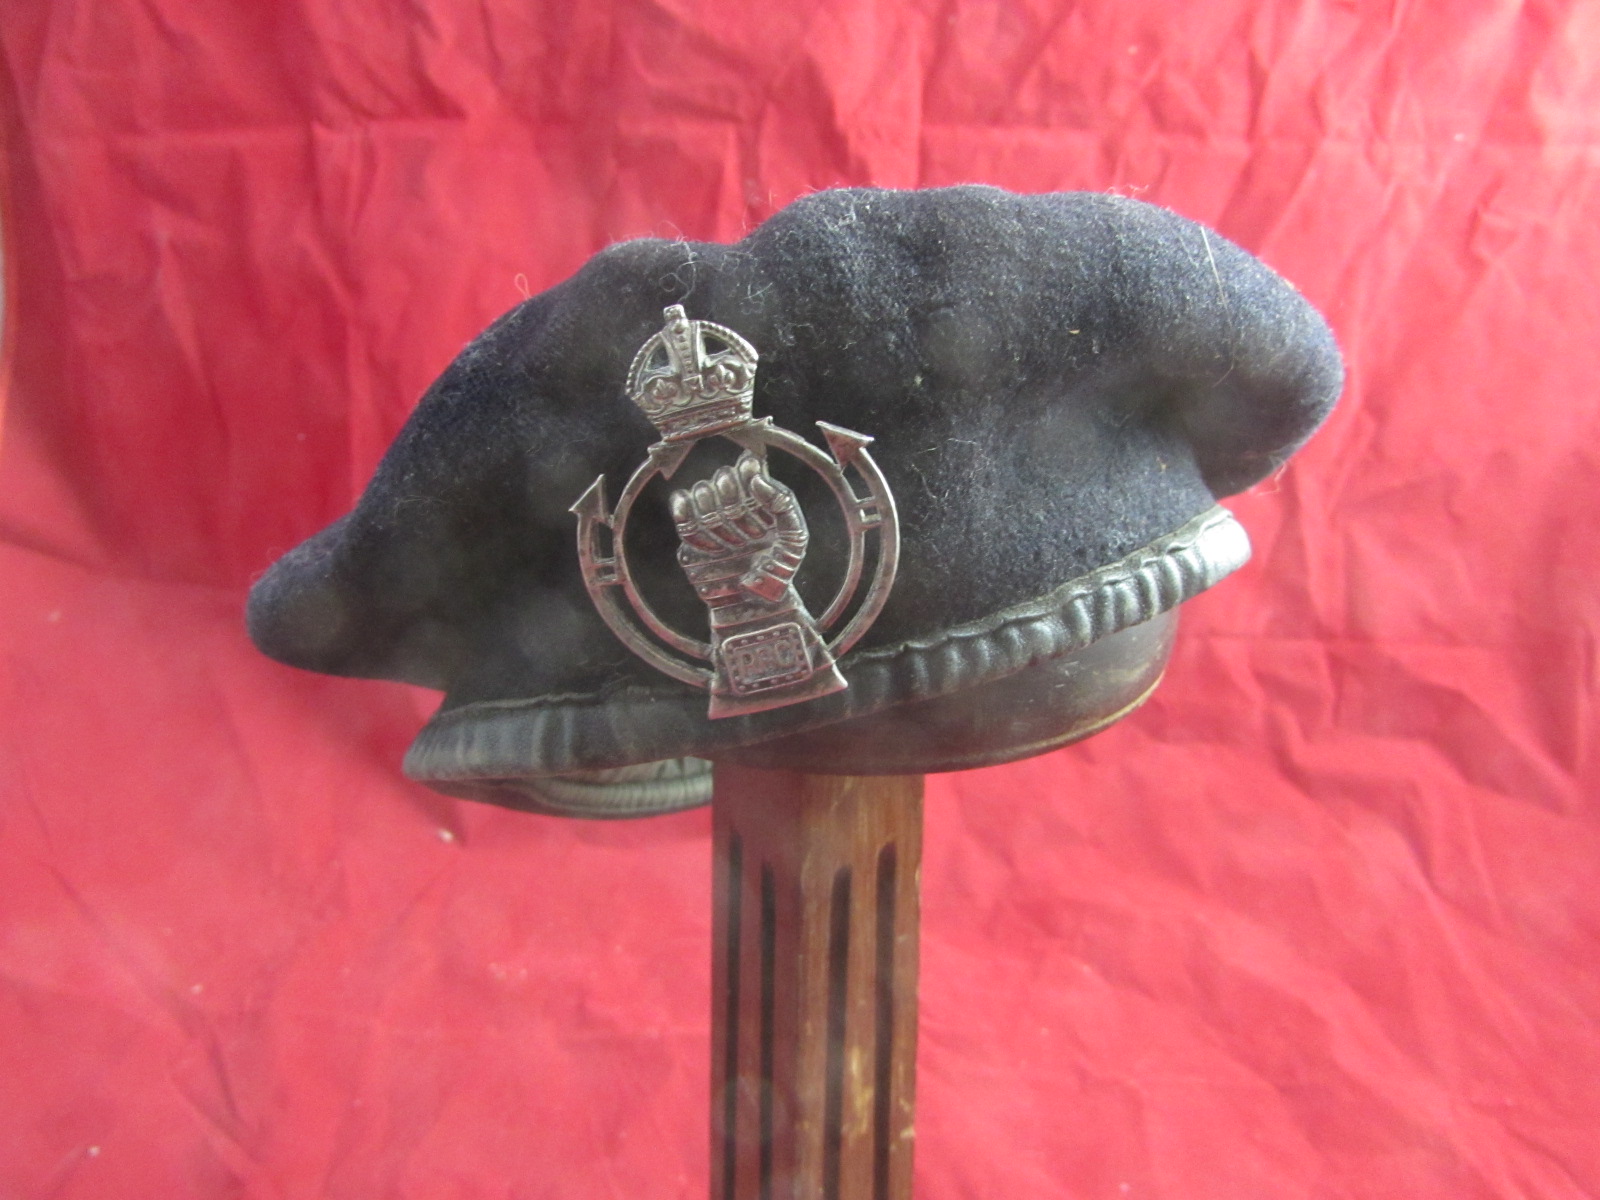 Royal Armoured Corps WW2 Beret and Badge.